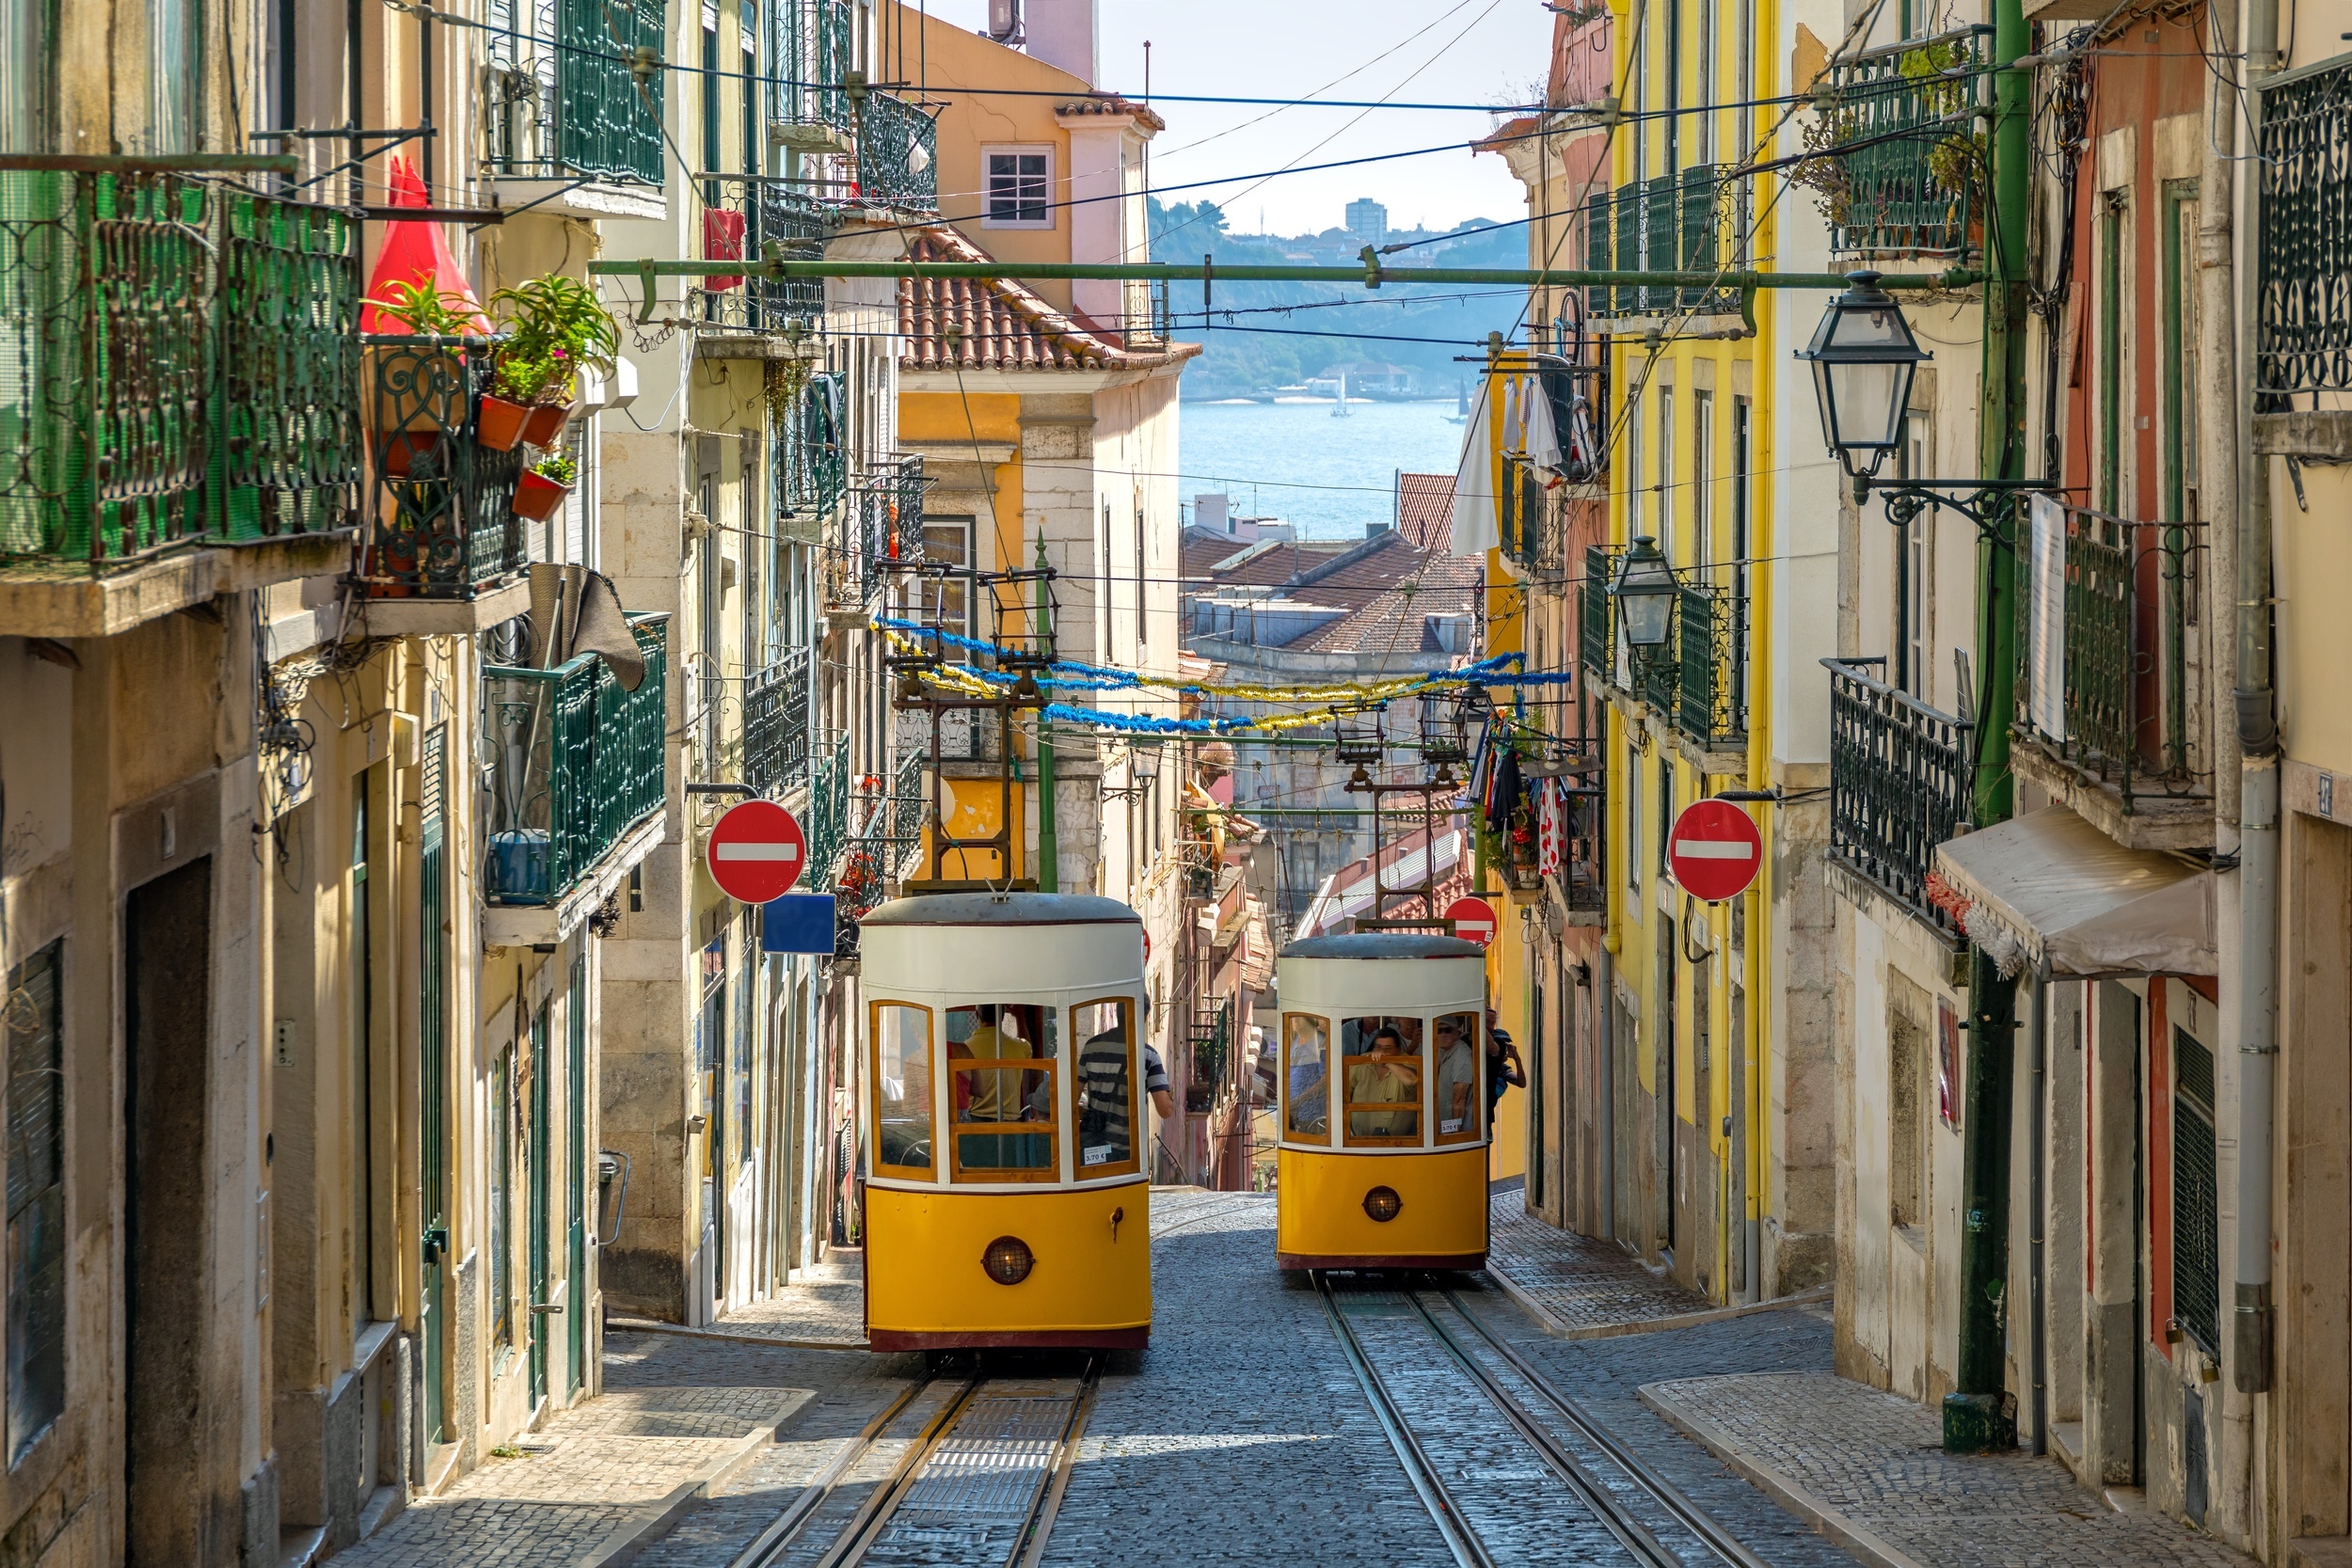 <p>Famously hilly Lisbon (like San Fransisco) isn’t the place to expect a leisurely stroll. However, if you’re up for some “urban hiking,” you’ll get a great workout while passing the street cars.</p><p>You may also like: <a href='https://www.yardbarker.com/lifestyle/articles/layered_dips_you_can_make_that_will_feed_the_whole_team_021324/s1__22916569'>Layered dips you can make that will feed the whole team</a></p>